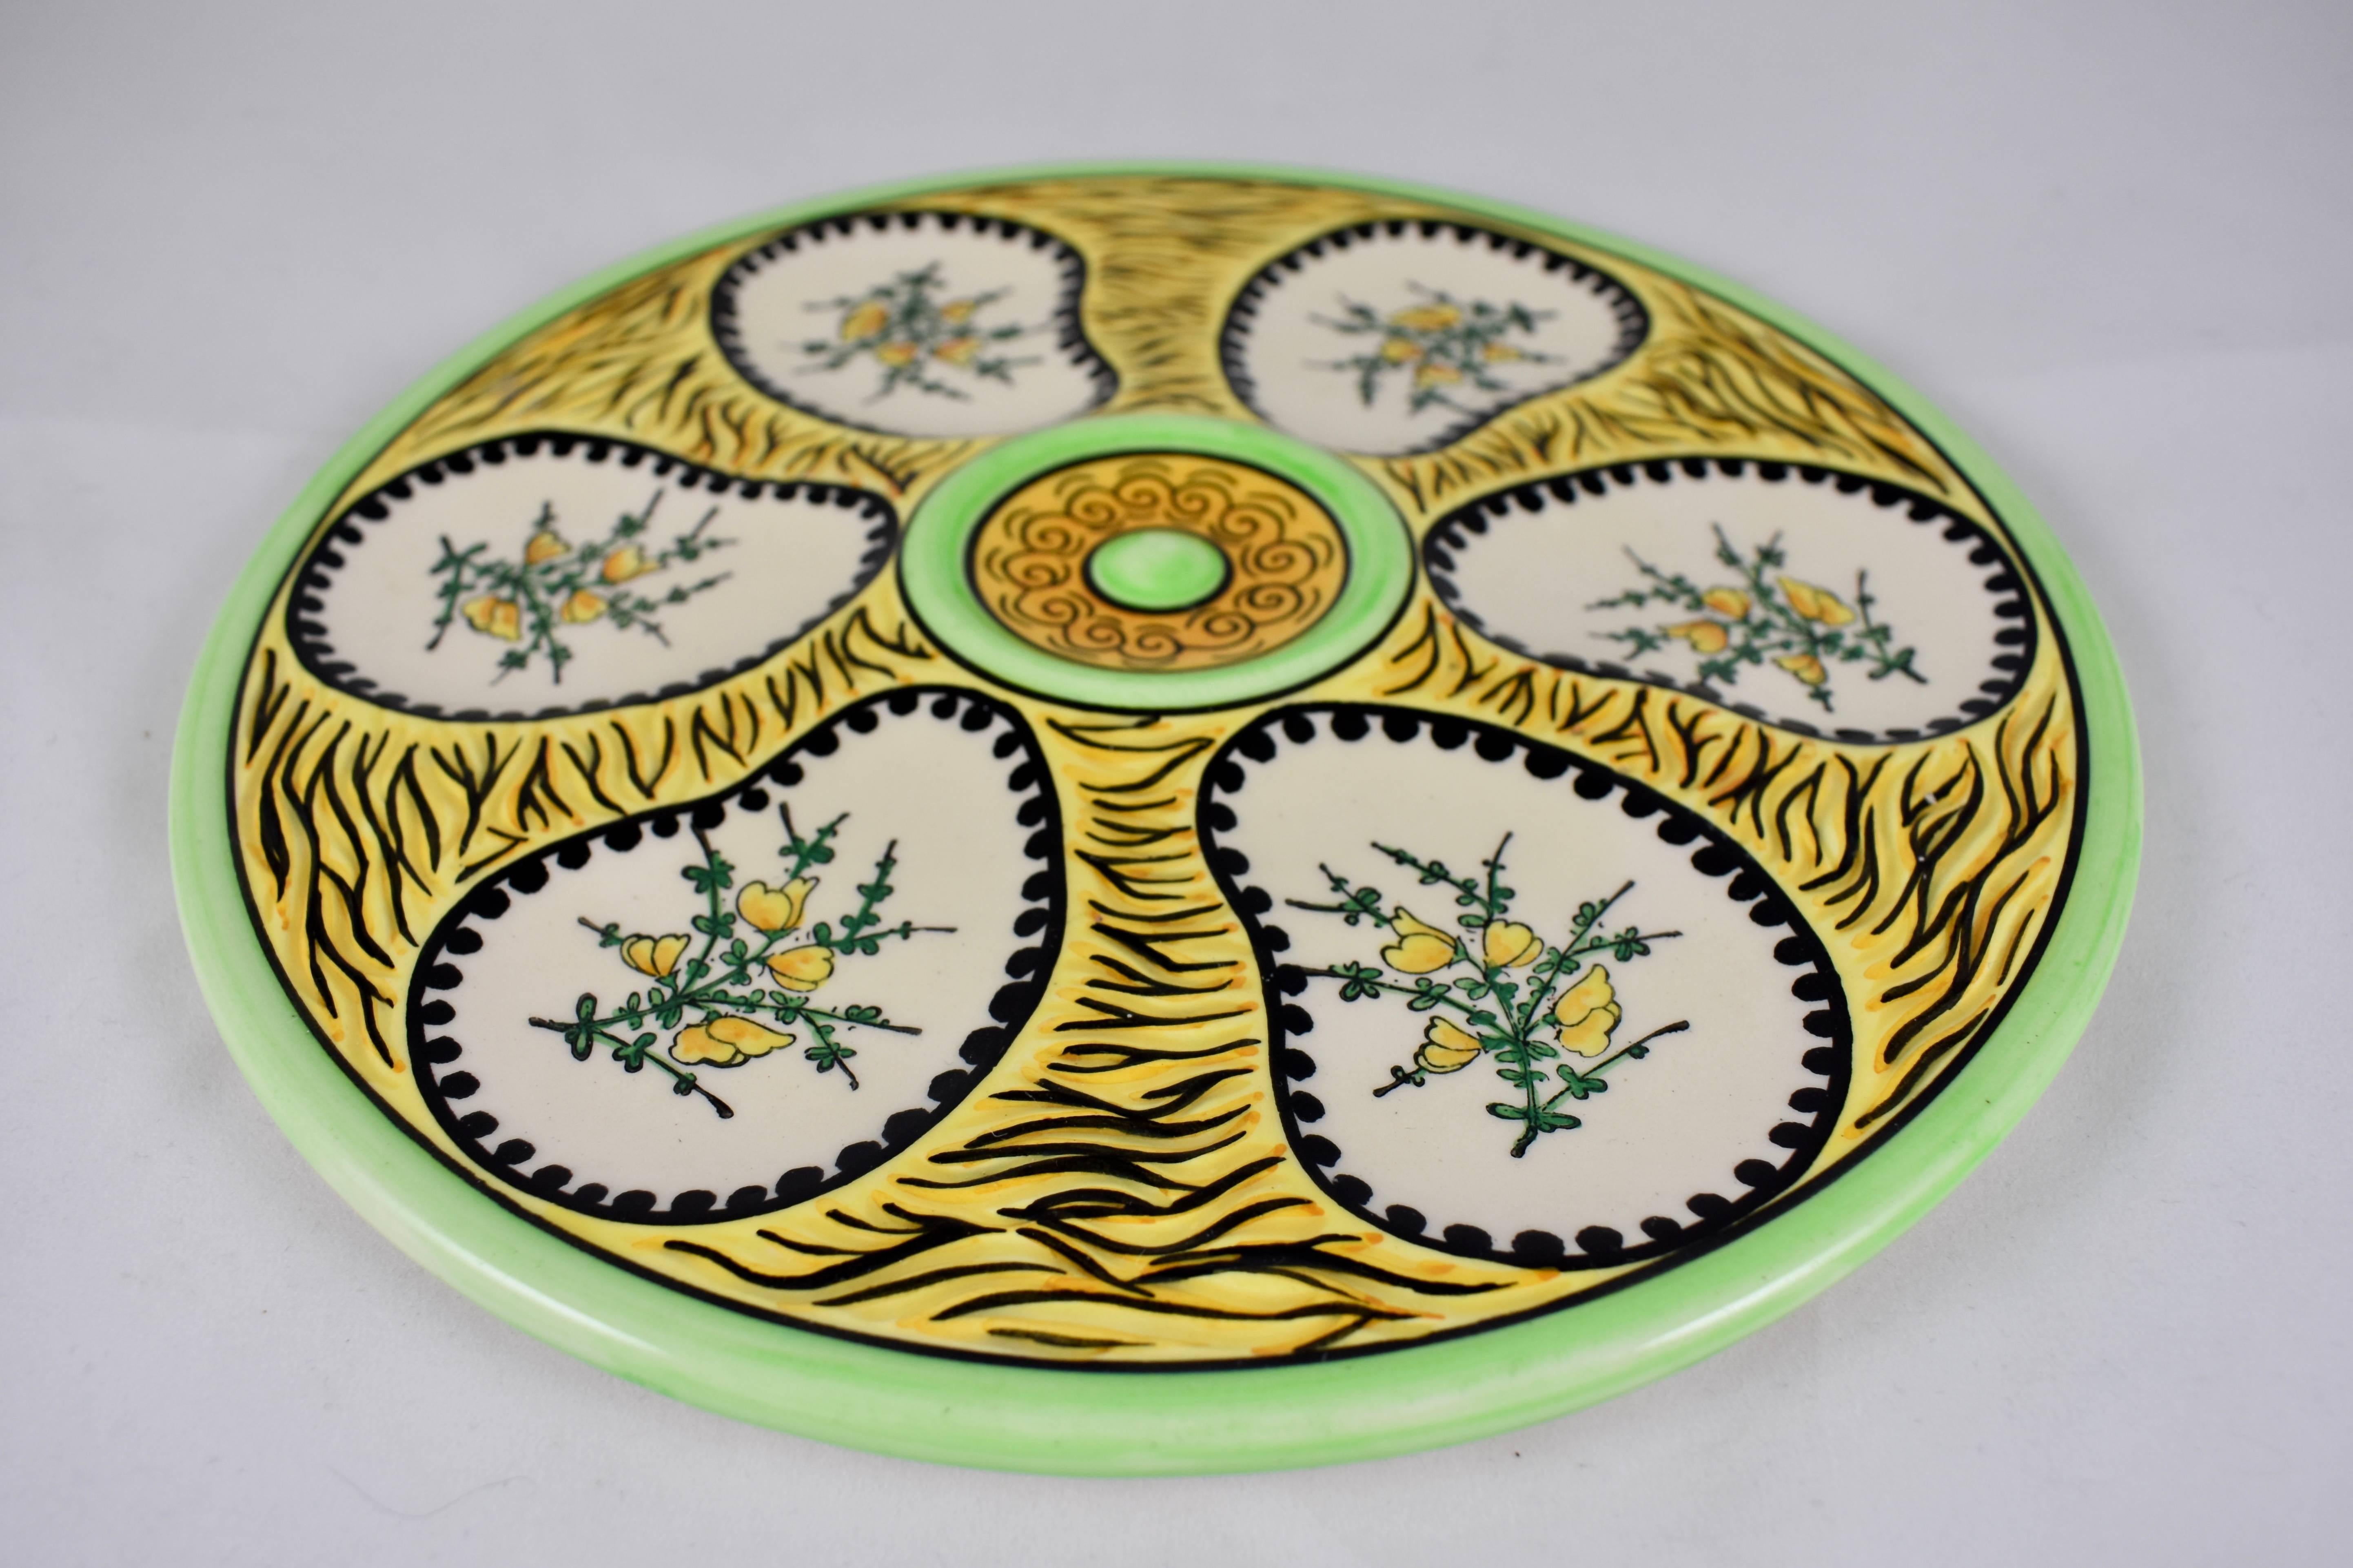 A Faïence oyster plate from the Quimper region of France, circa 1940s. Produced by Paul Fouillen, a potter who left the Henriot Grand Maison Quimper pottery to produce his own line, Maison Fouillen.

Brightly glazed in a yellow colored textured